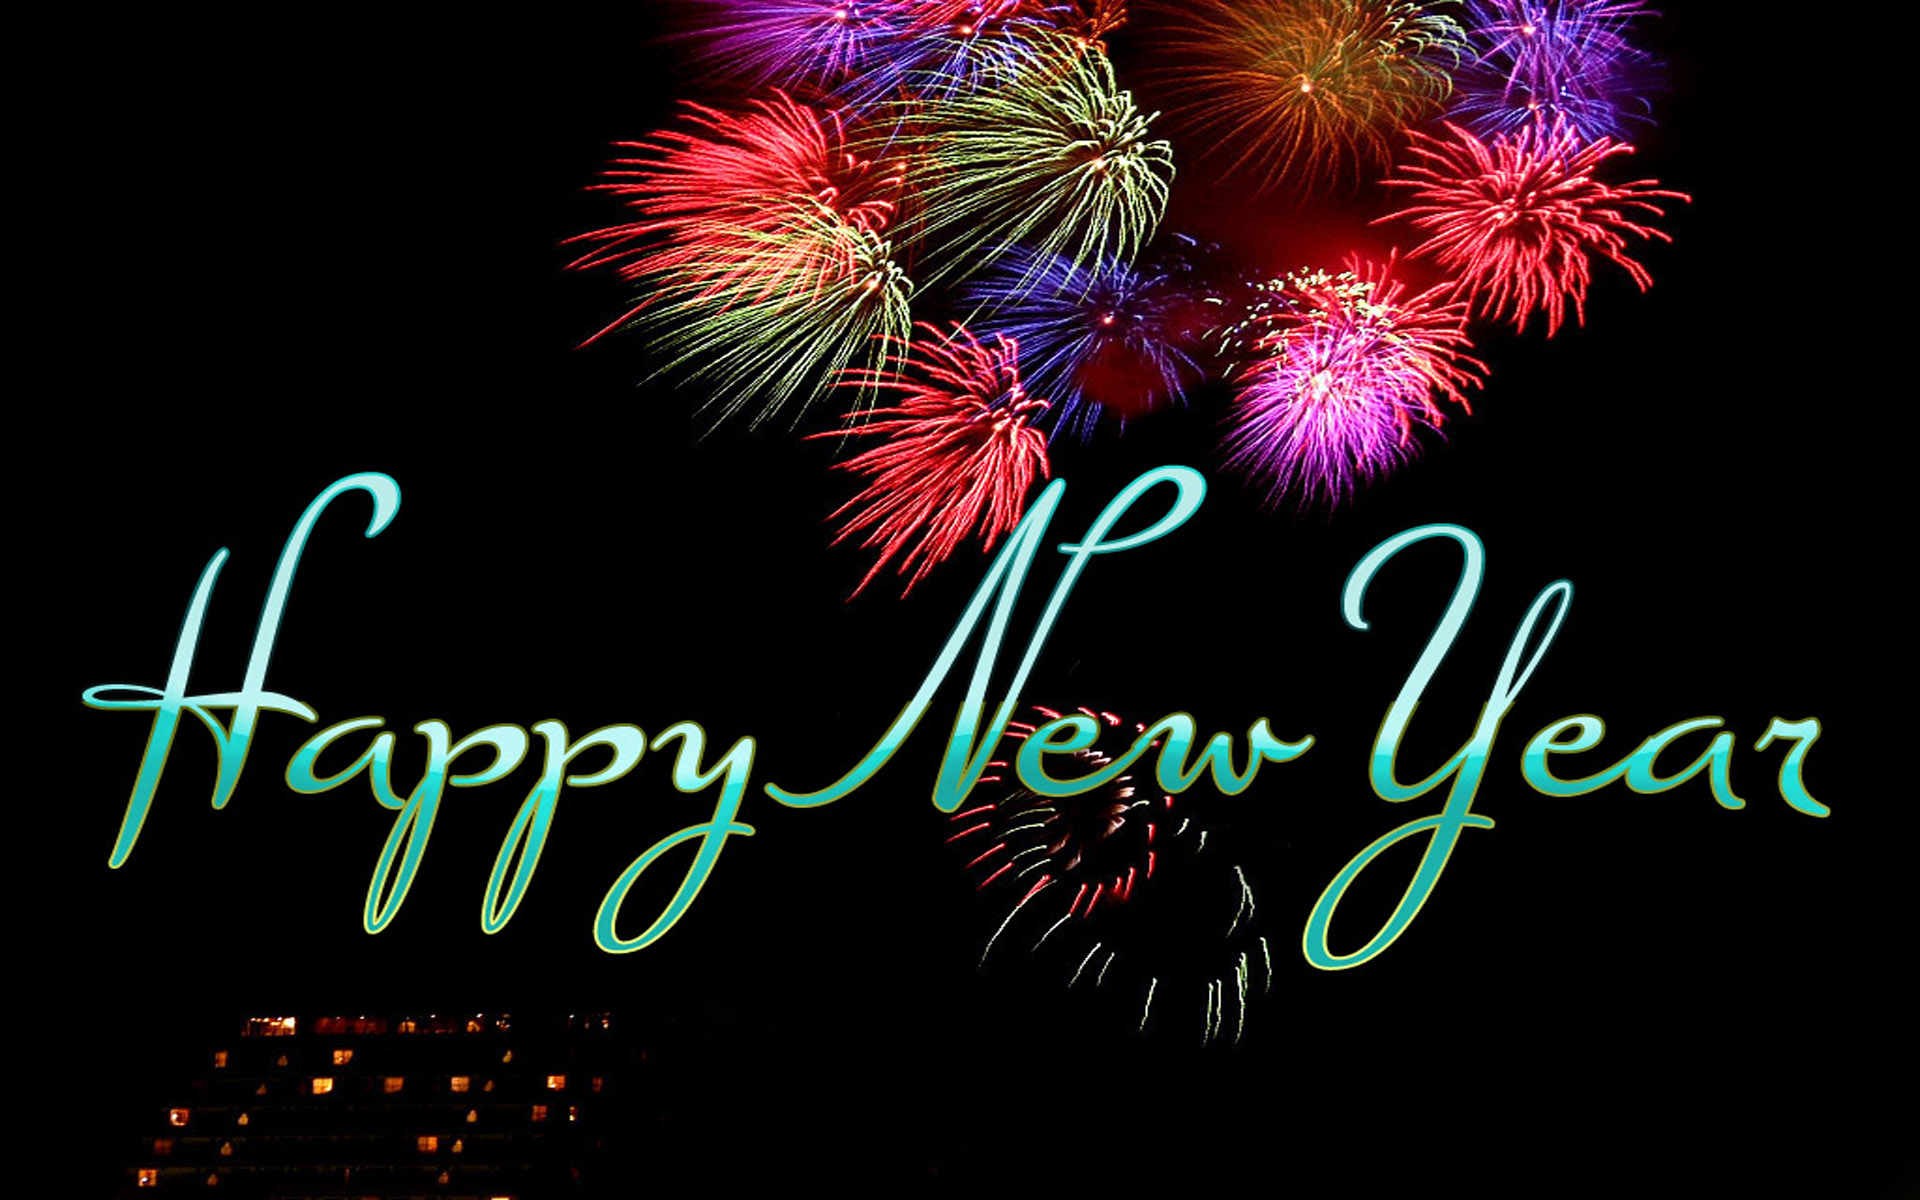 Happy New Year 2015 HD Wallpapers Happy New Year 2015 HD Wallpapers